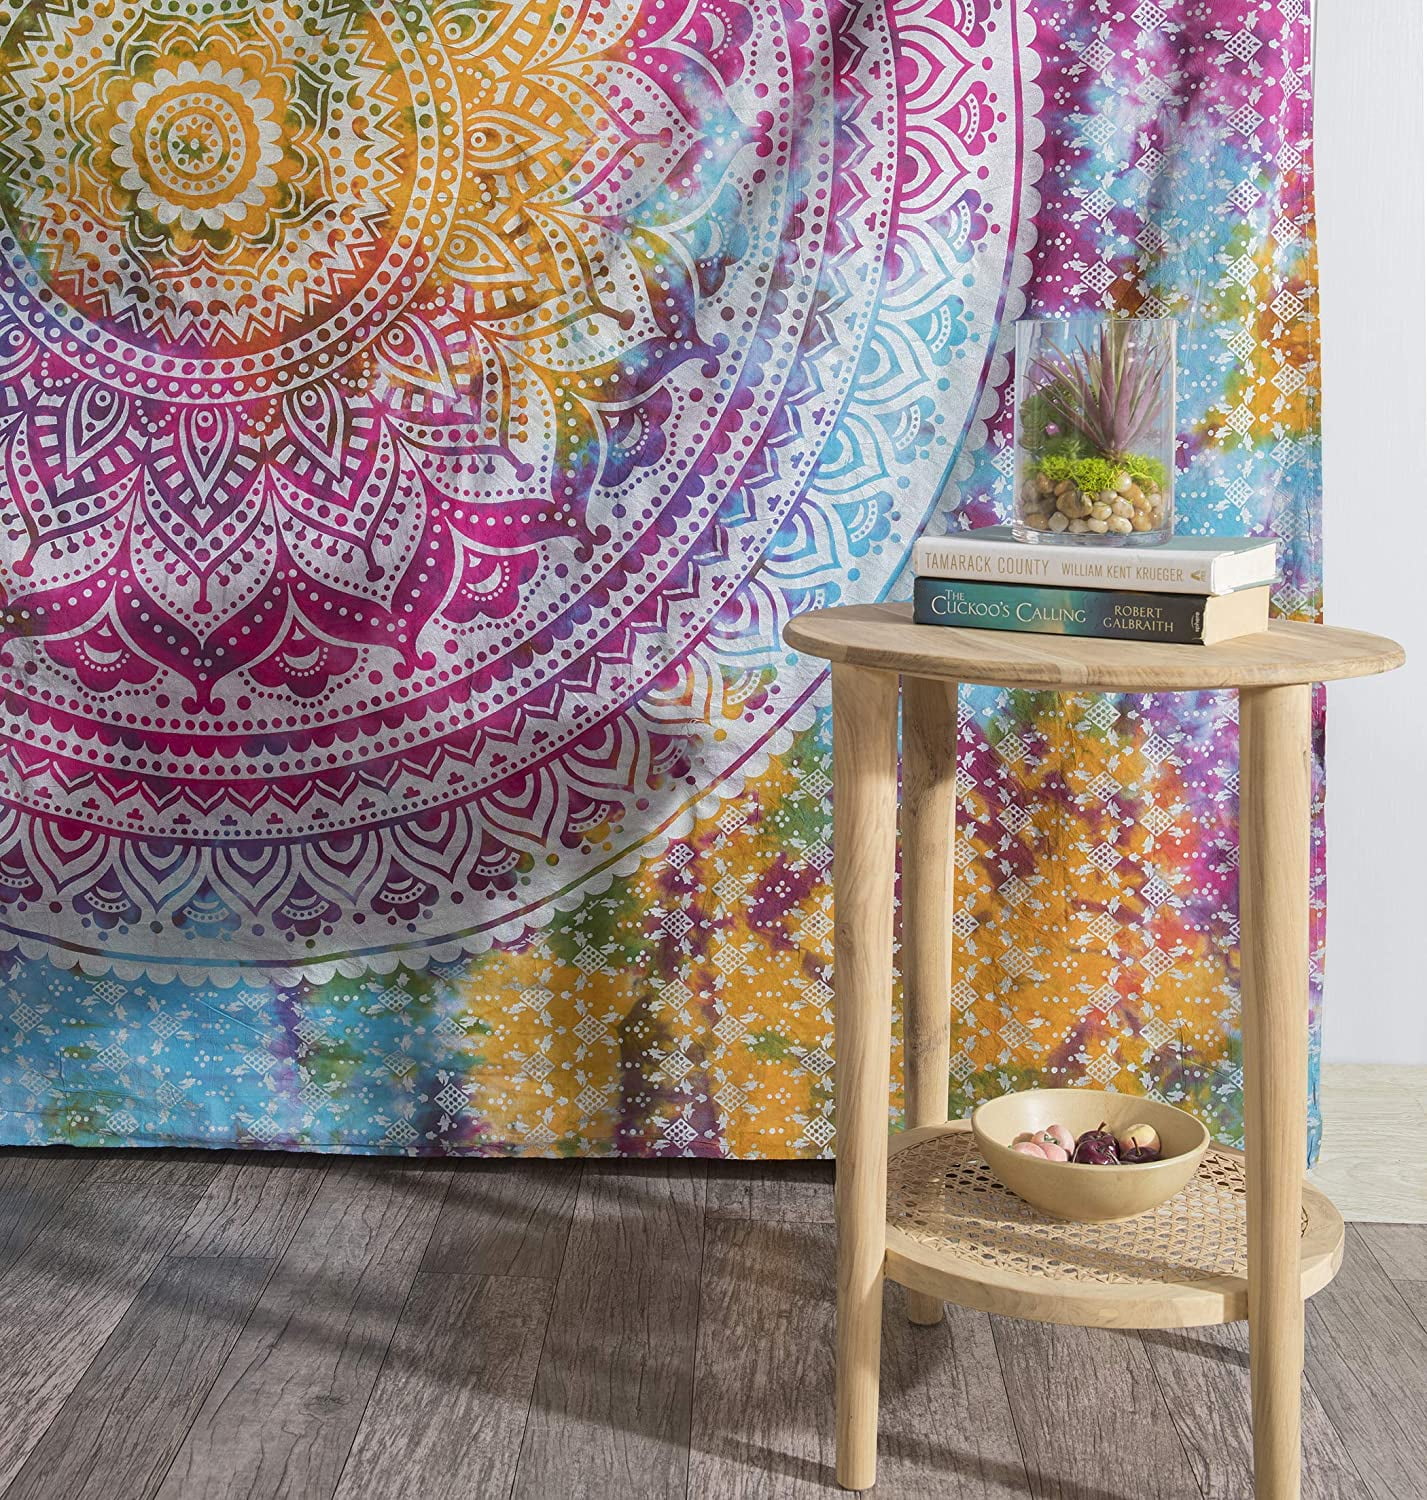 Details about   Green Color Throw Cotton bedroom Wall Hanging Hippie Indian Tapestry Mandala Art 